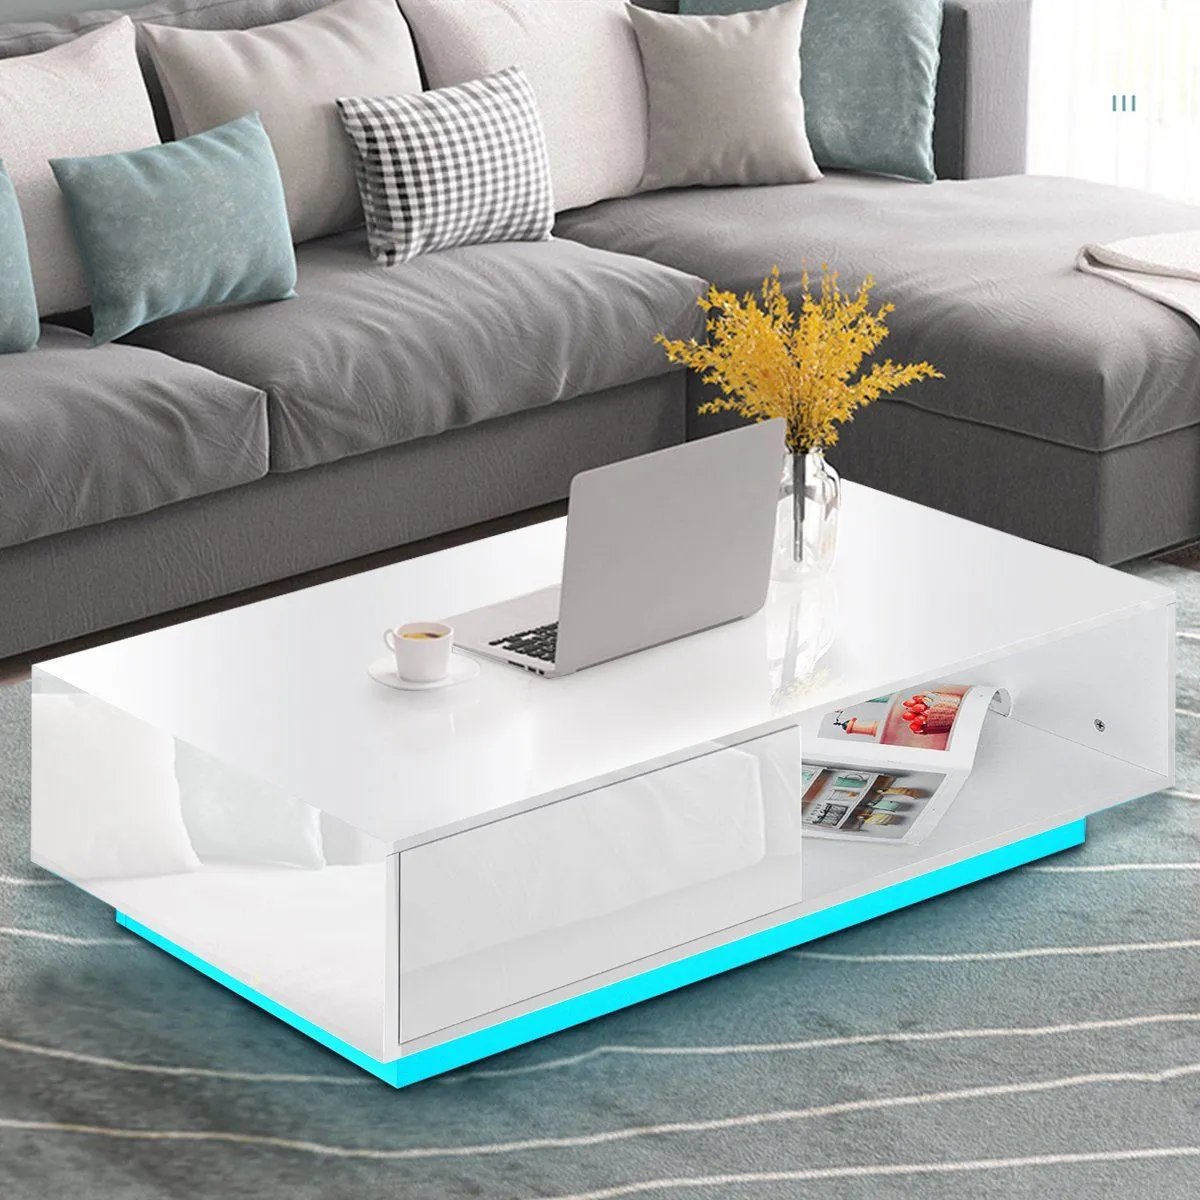 centre piece with high gloss finish, in-built LED light, side shelves for storage, grey sofa, cushions, carpet on floor, laptop on table top, living room, decorative piece